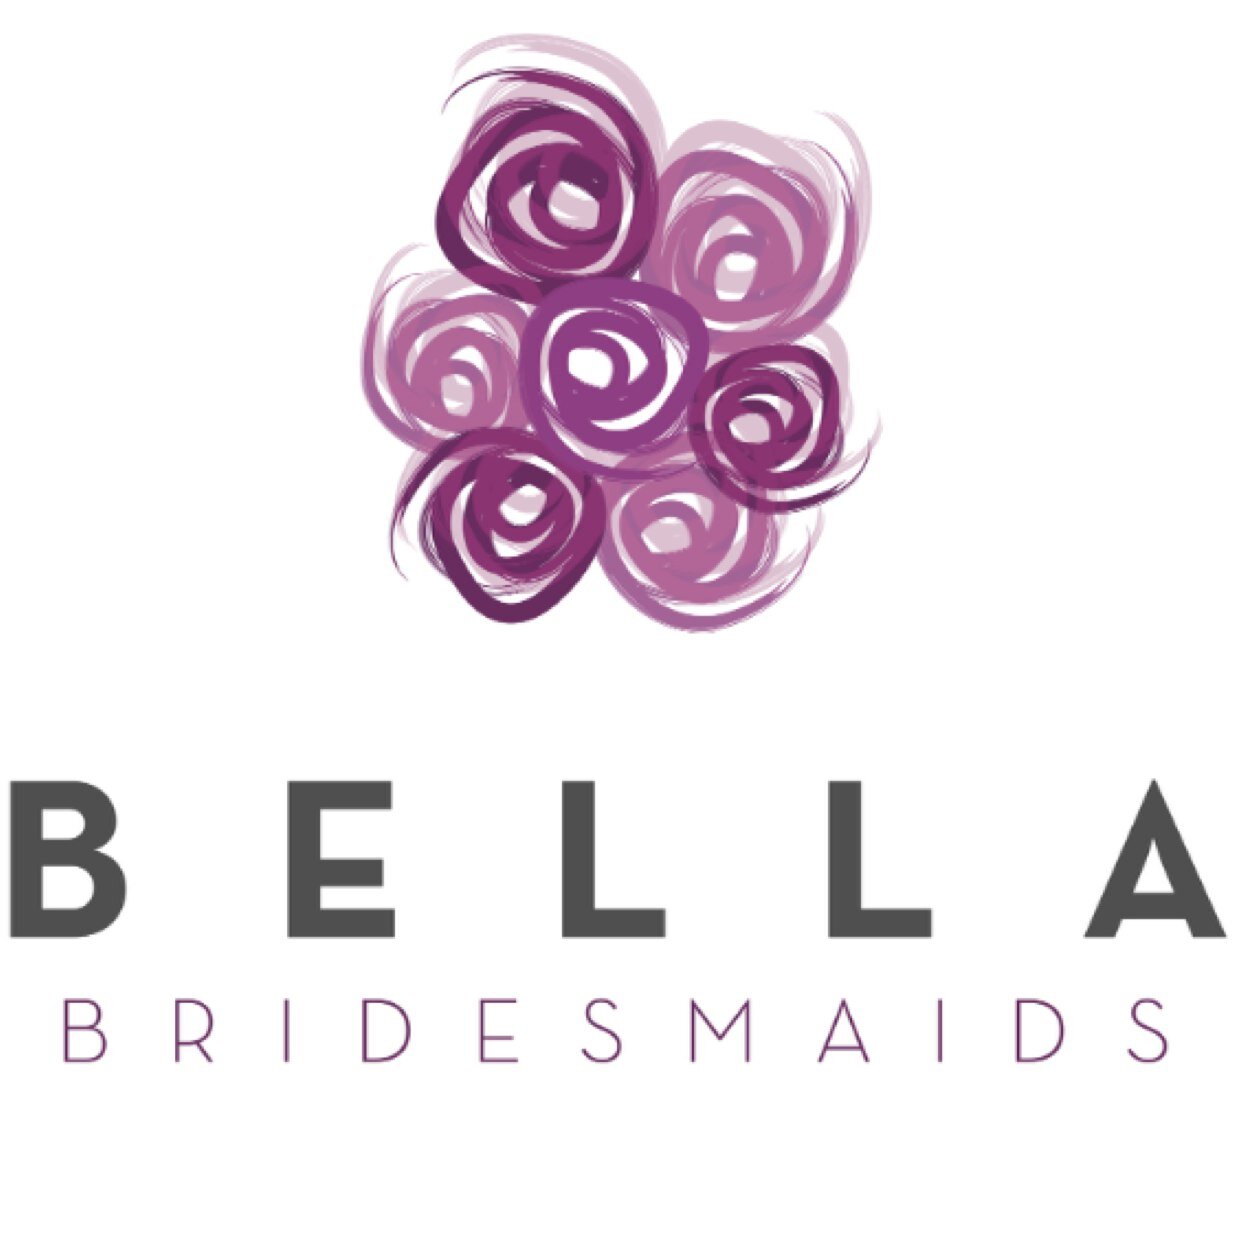 ~A Collection of Chic and Modern Bridesmaid Dresses and Accessories~ Contact us at: batonrouge@bellabridesmaids.com